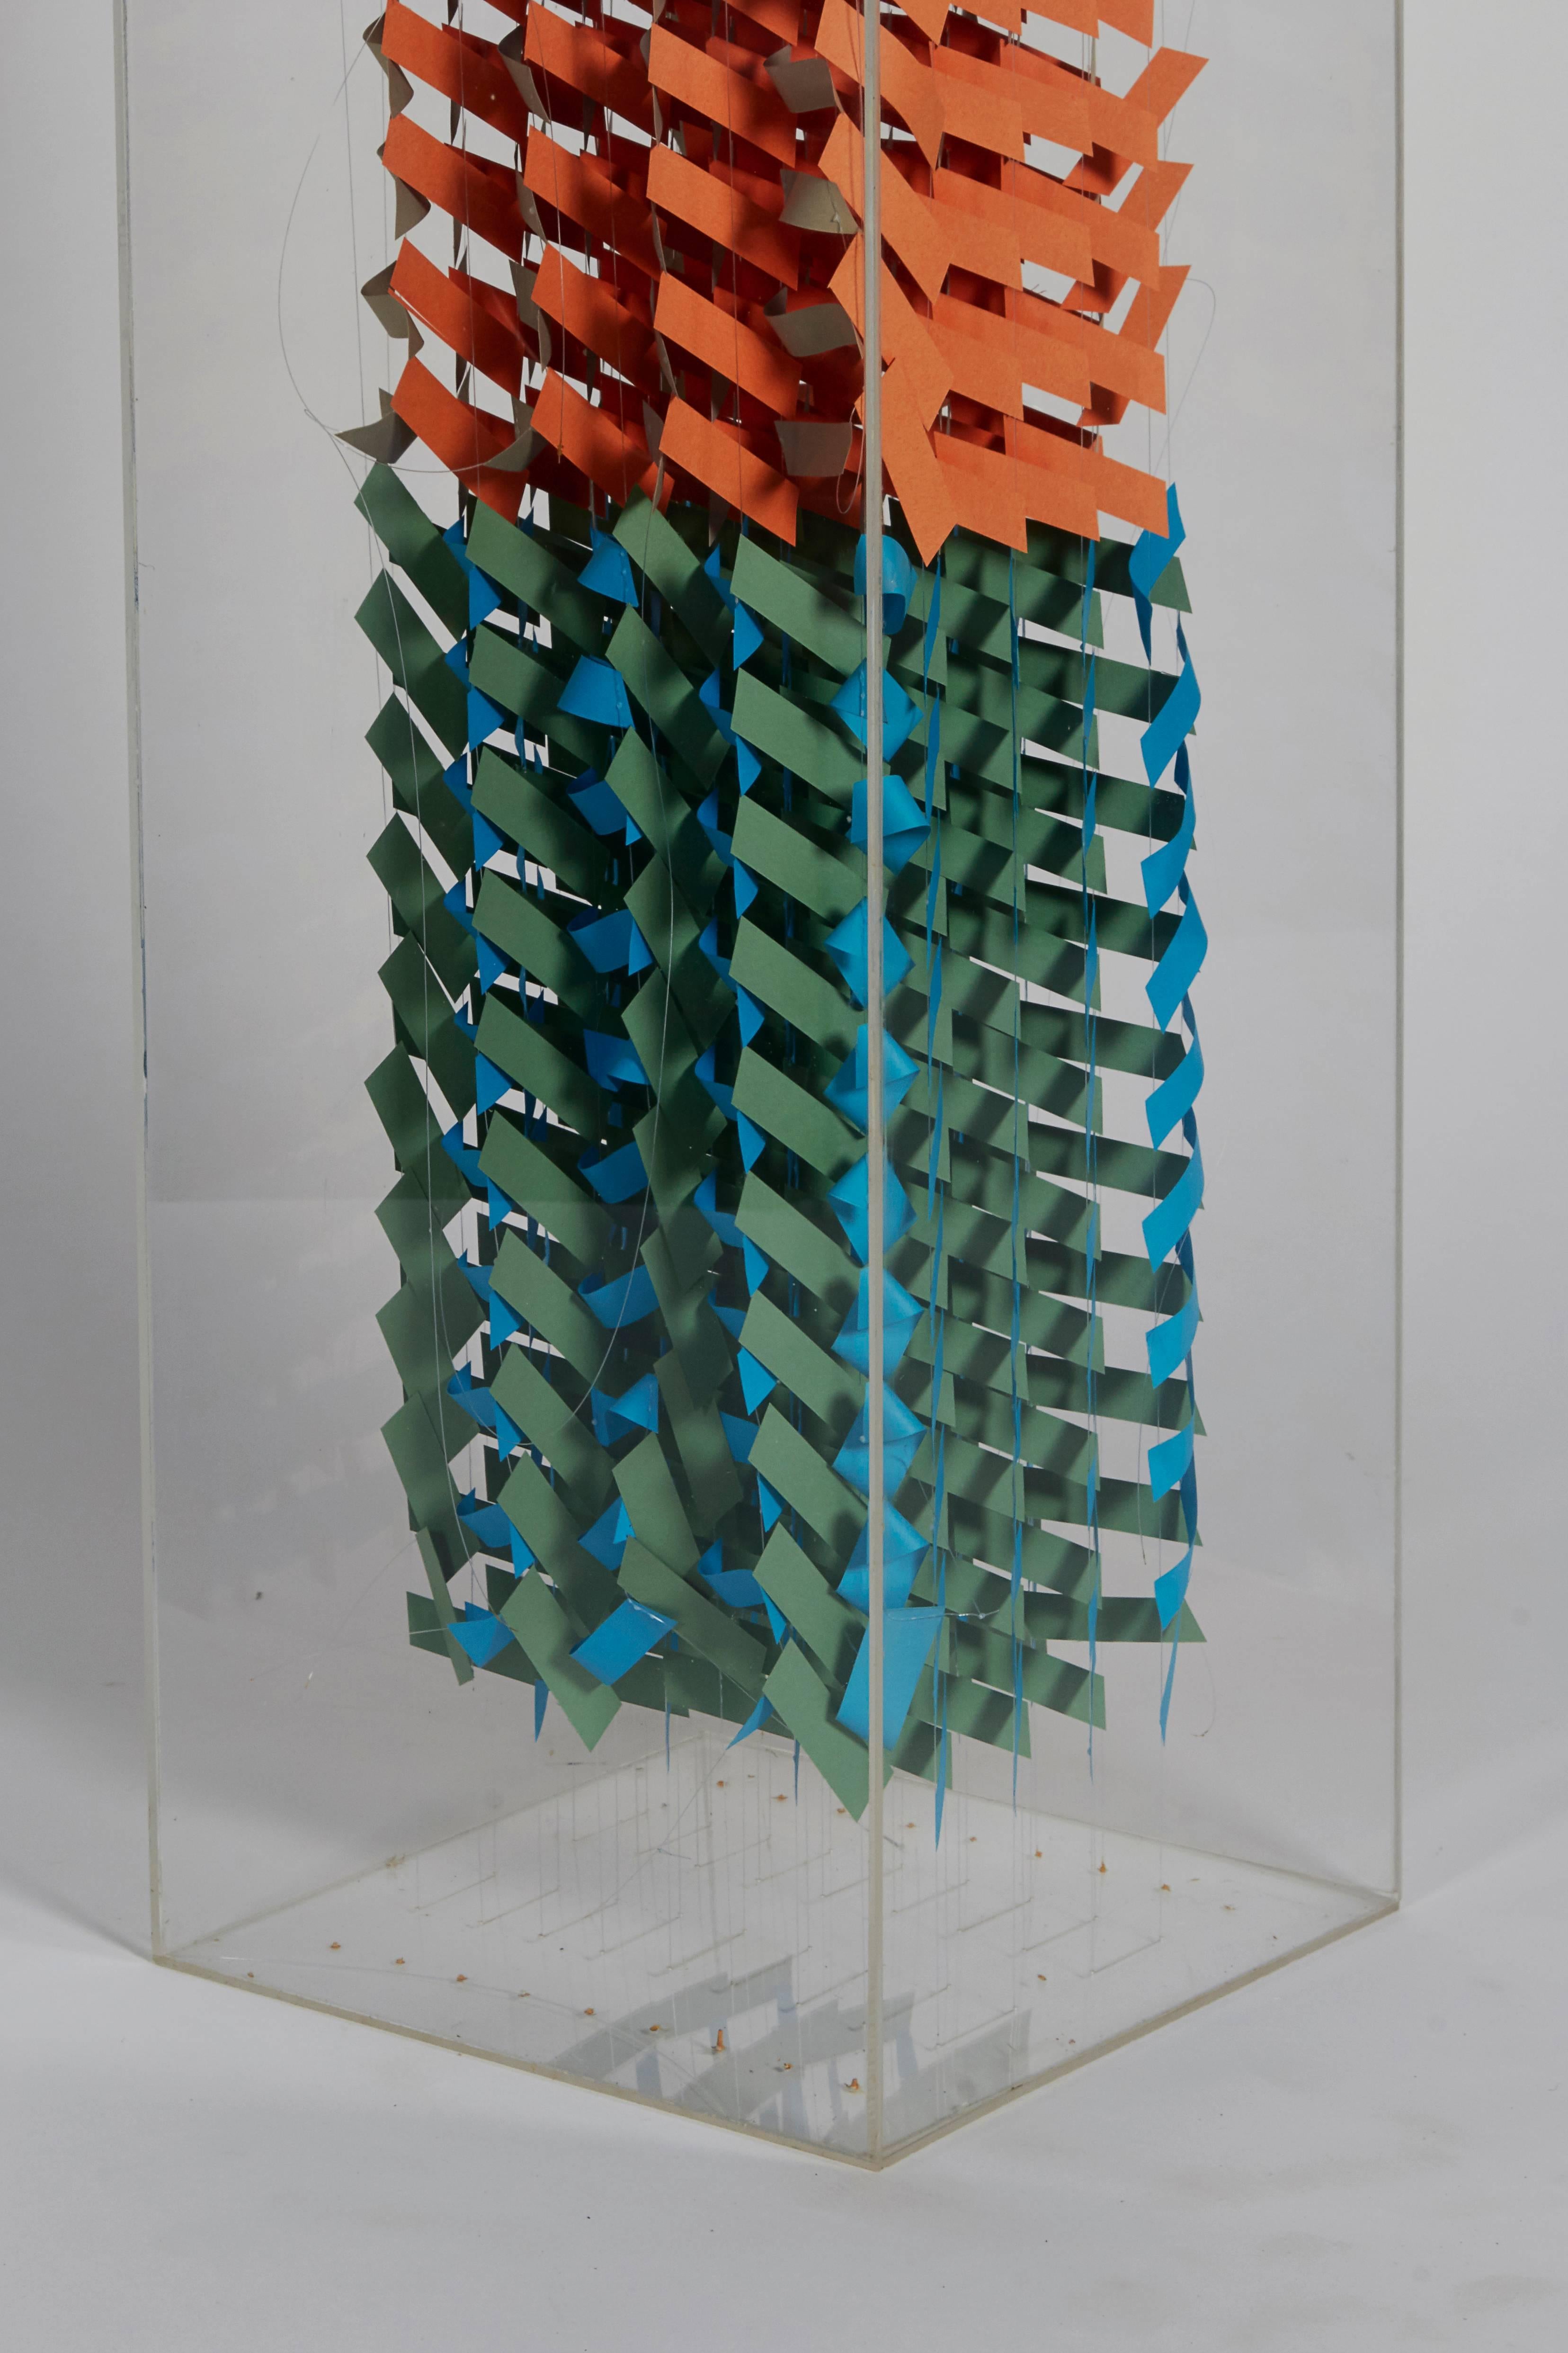 Wood and Paper Sculpture in Acrylic Box by Irving Harper, USA 2